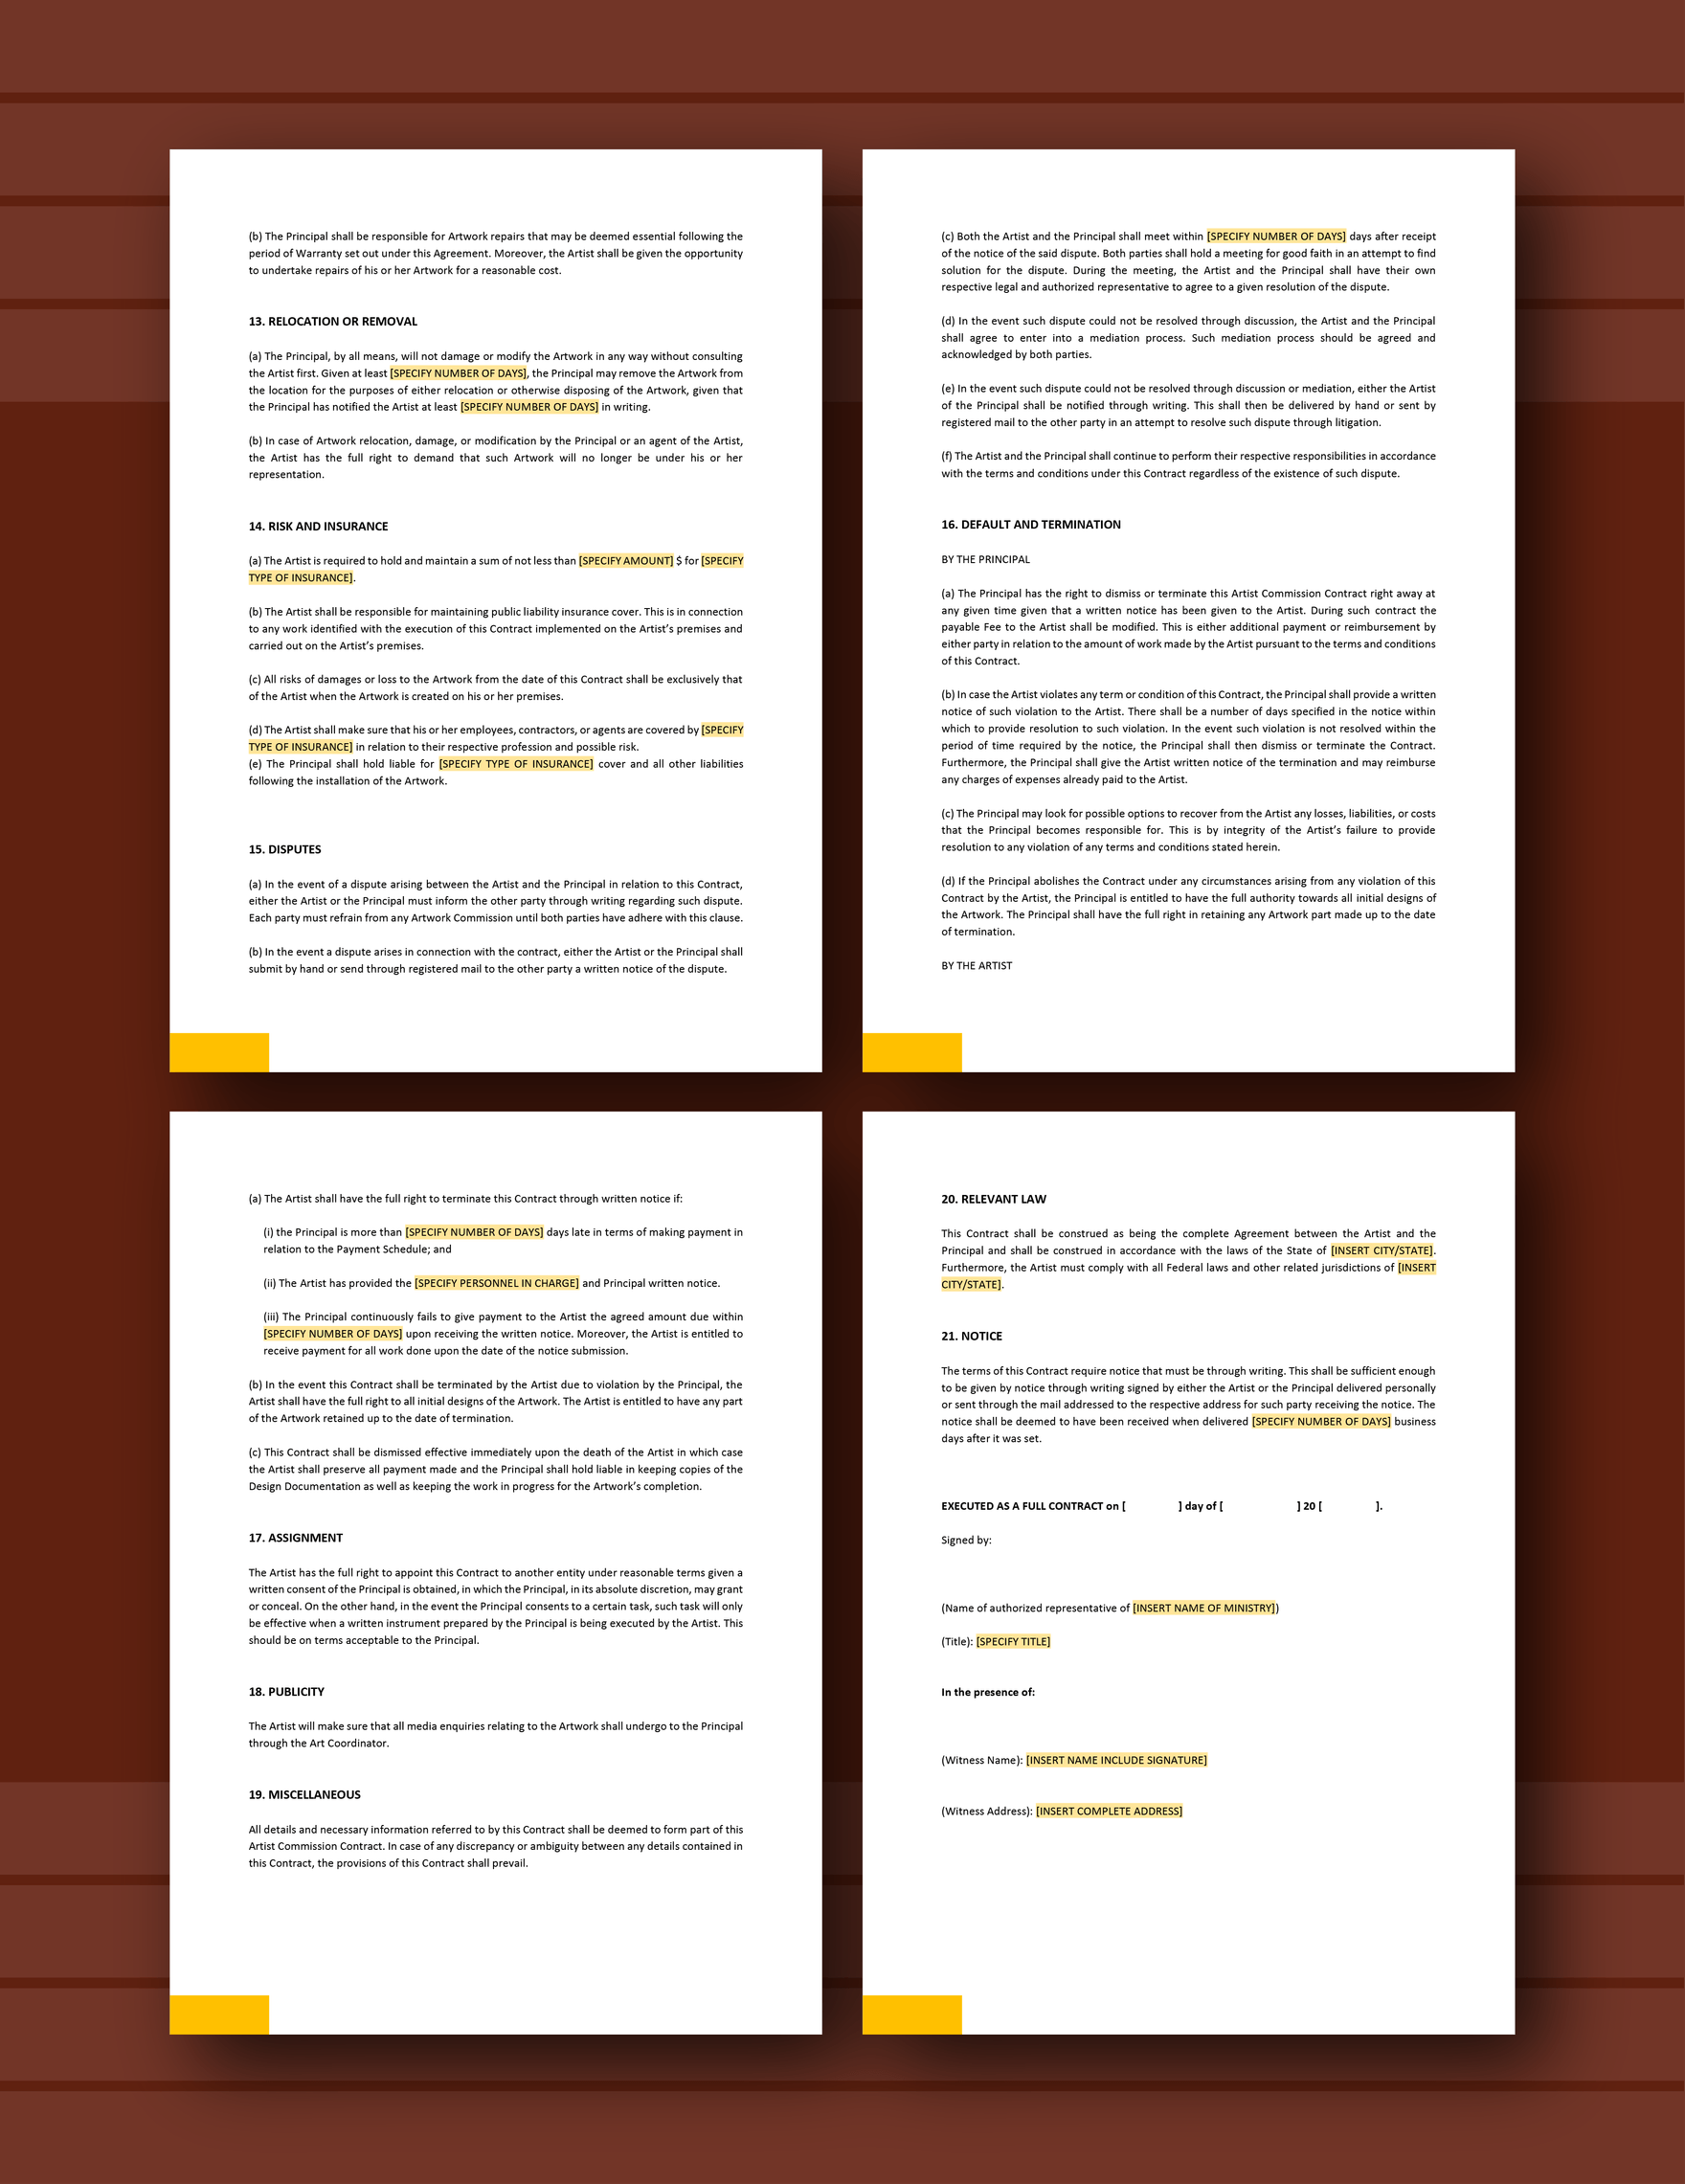 Artist Commission Contract Template